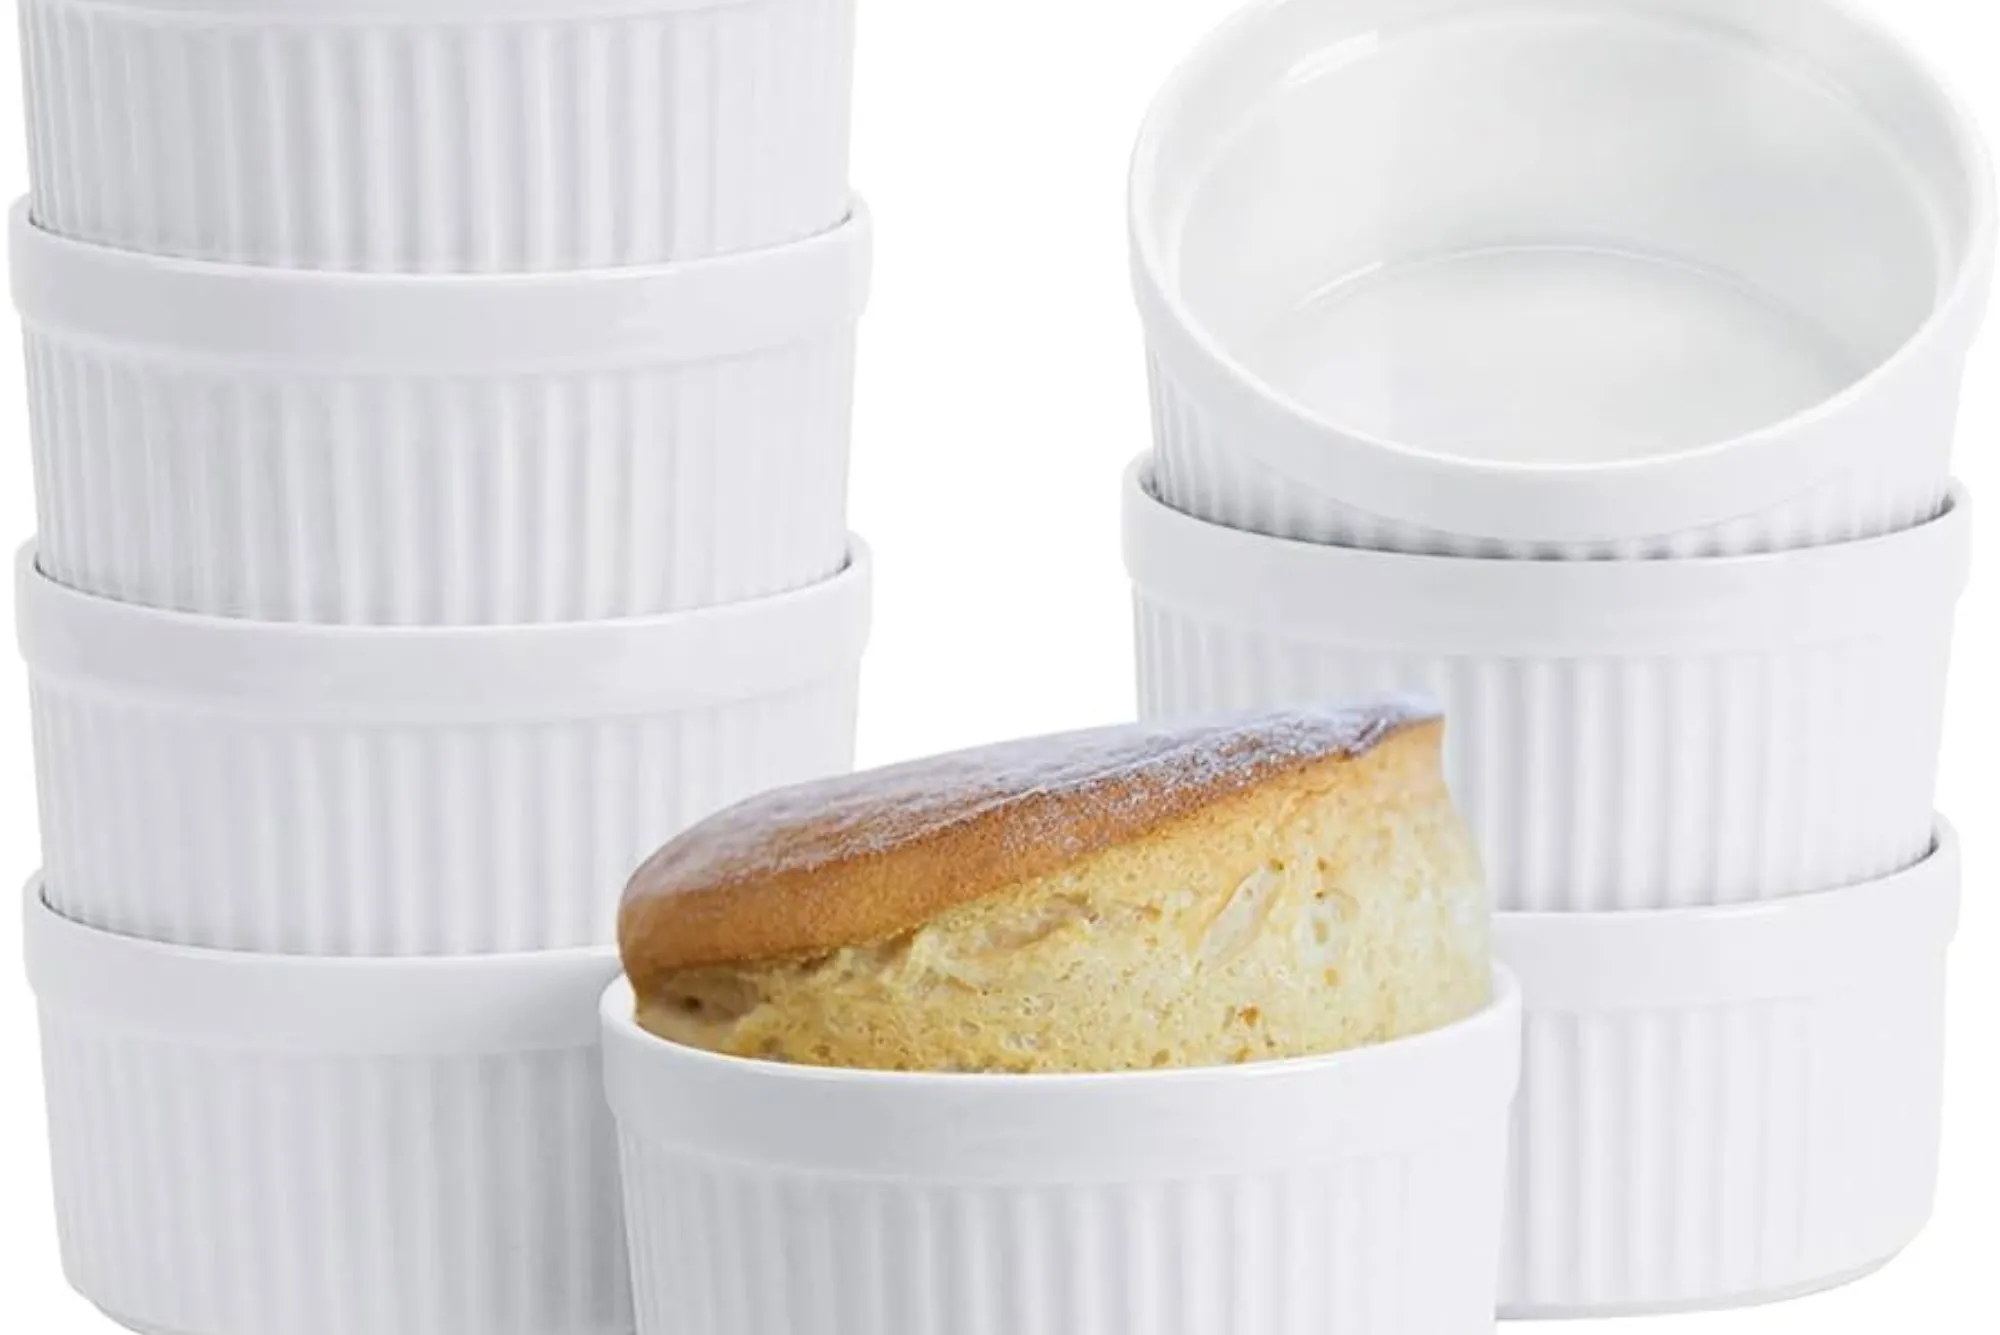 8 Oz Ramekins with Lid - Set of 6 Bake and Serve with Confidence